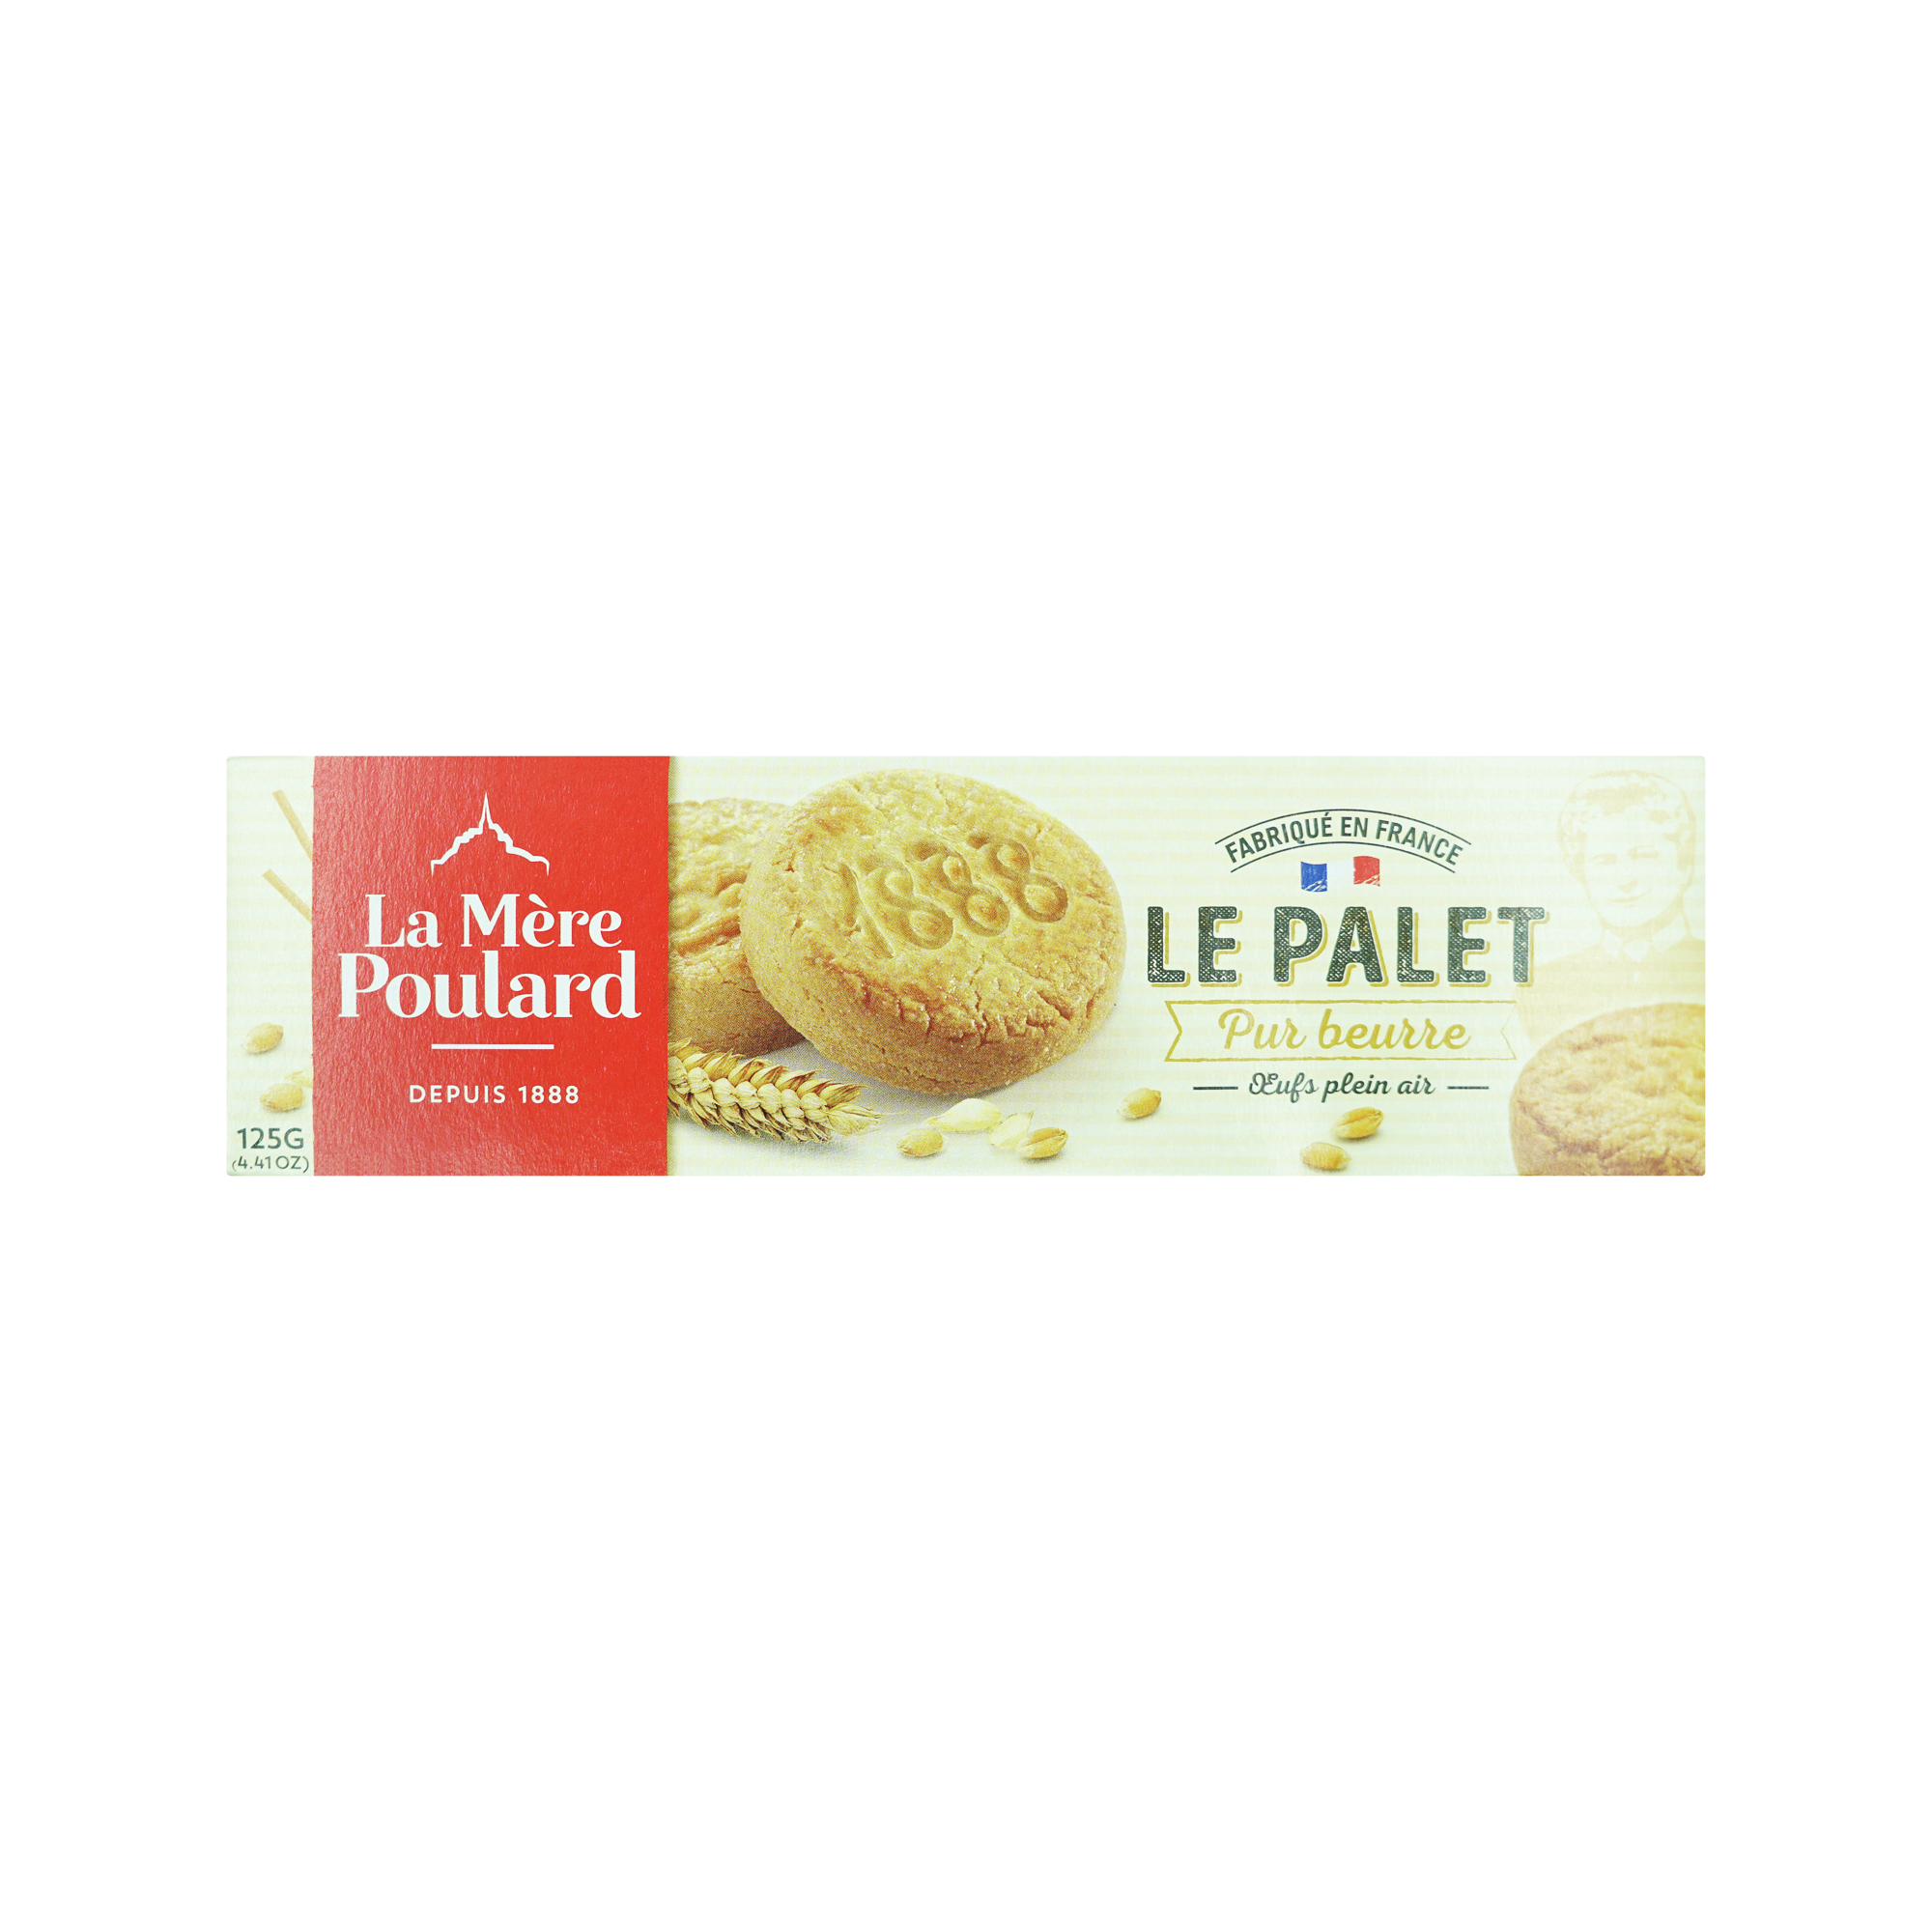 Mere Poulard Pure Butter Palets Biscuits (125g)